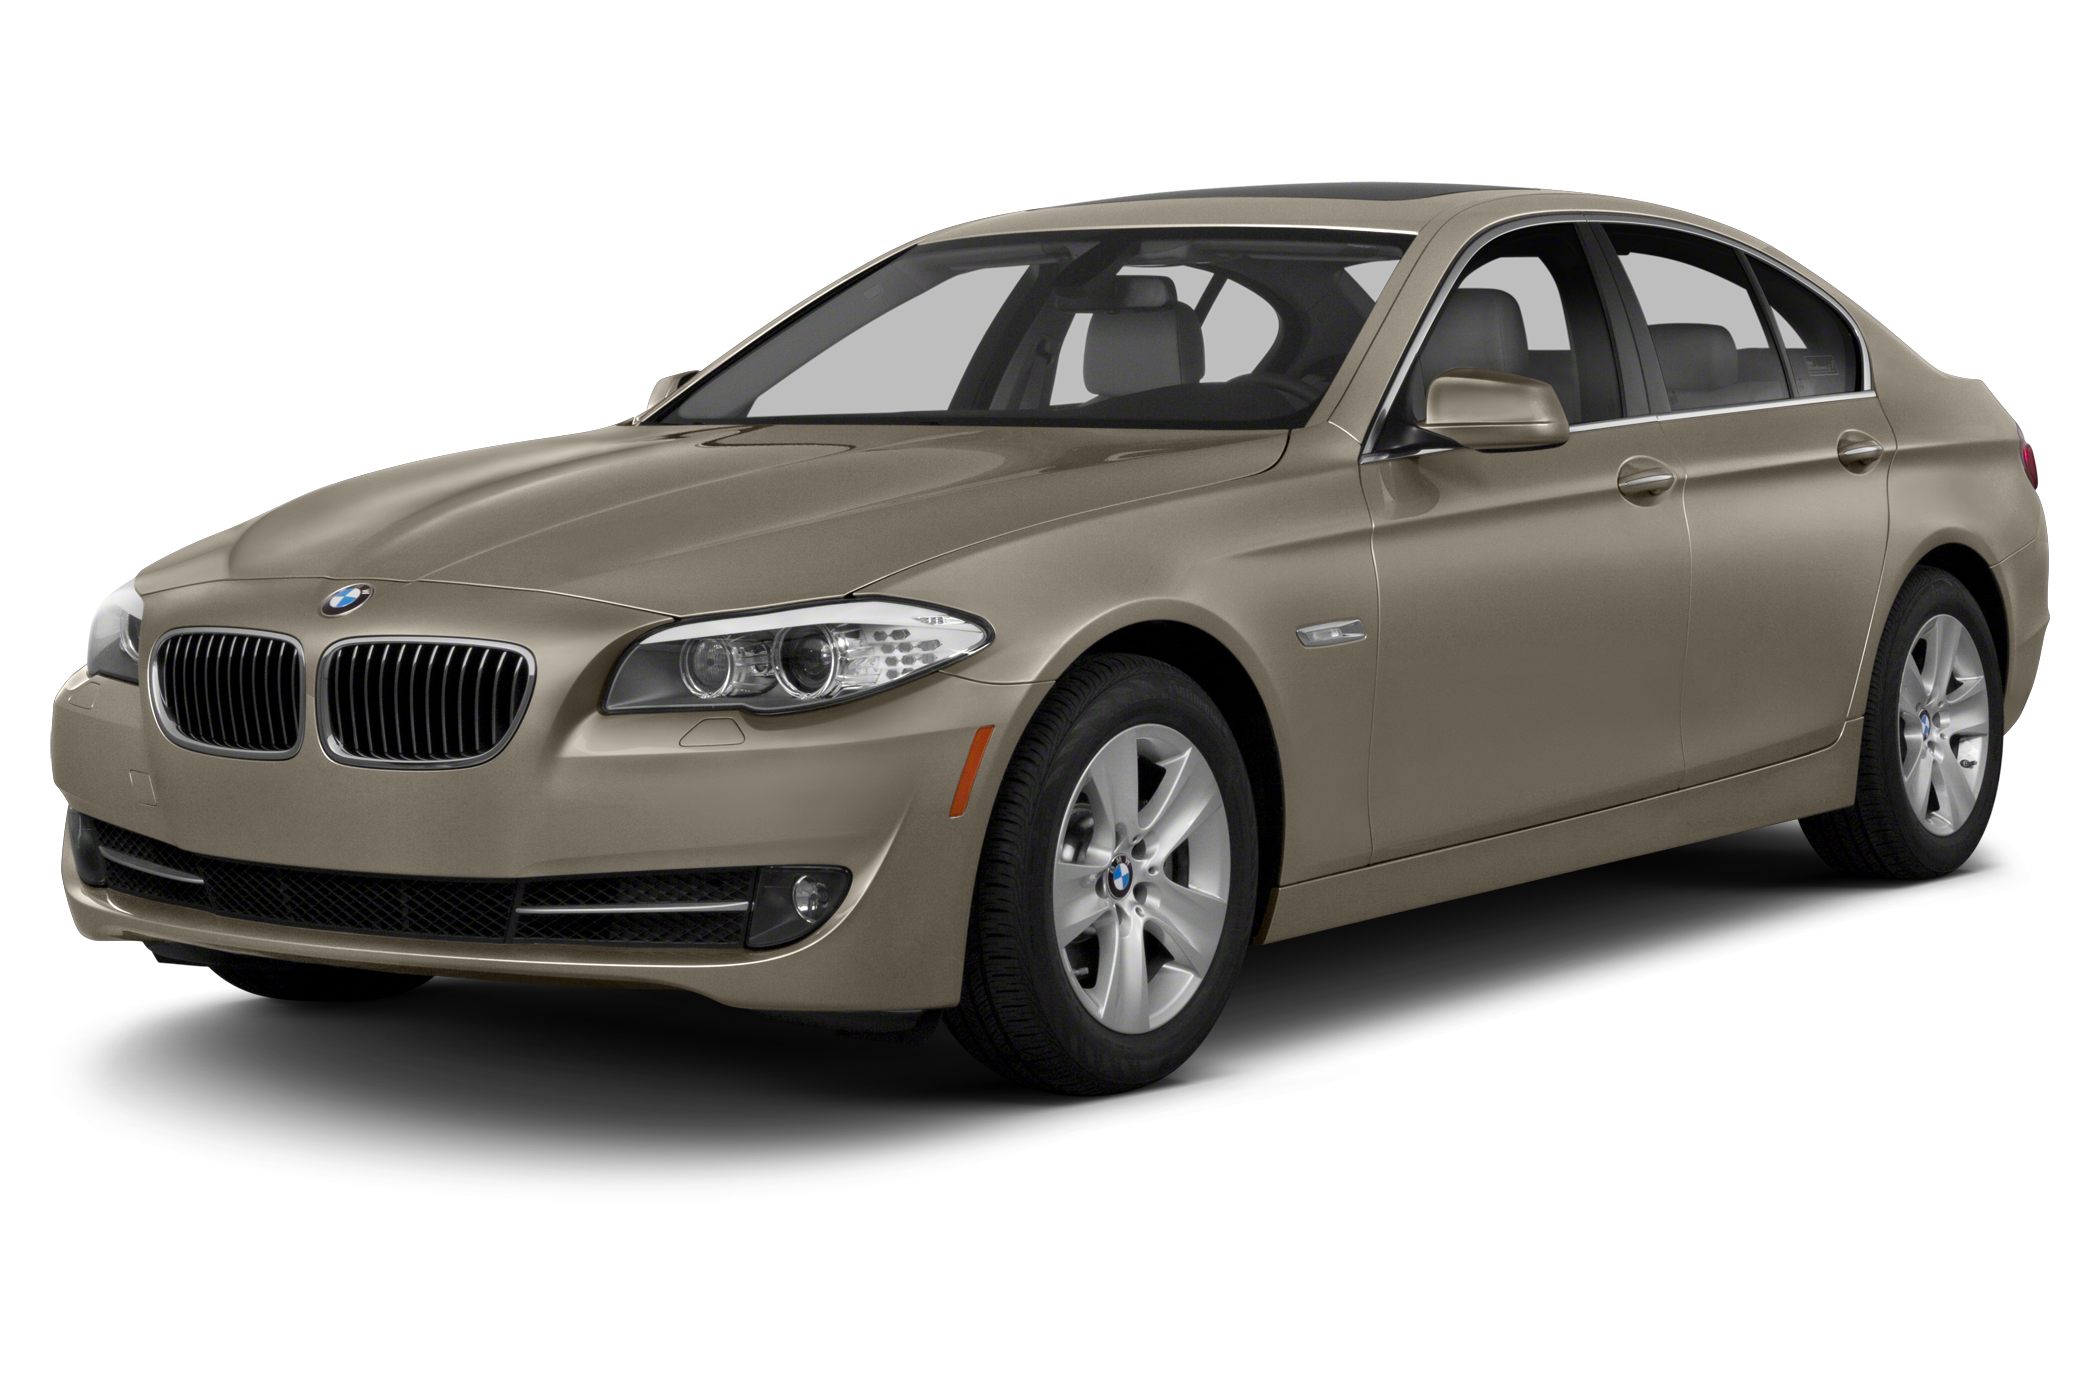 Used bmw for sale in fort worth texas #1